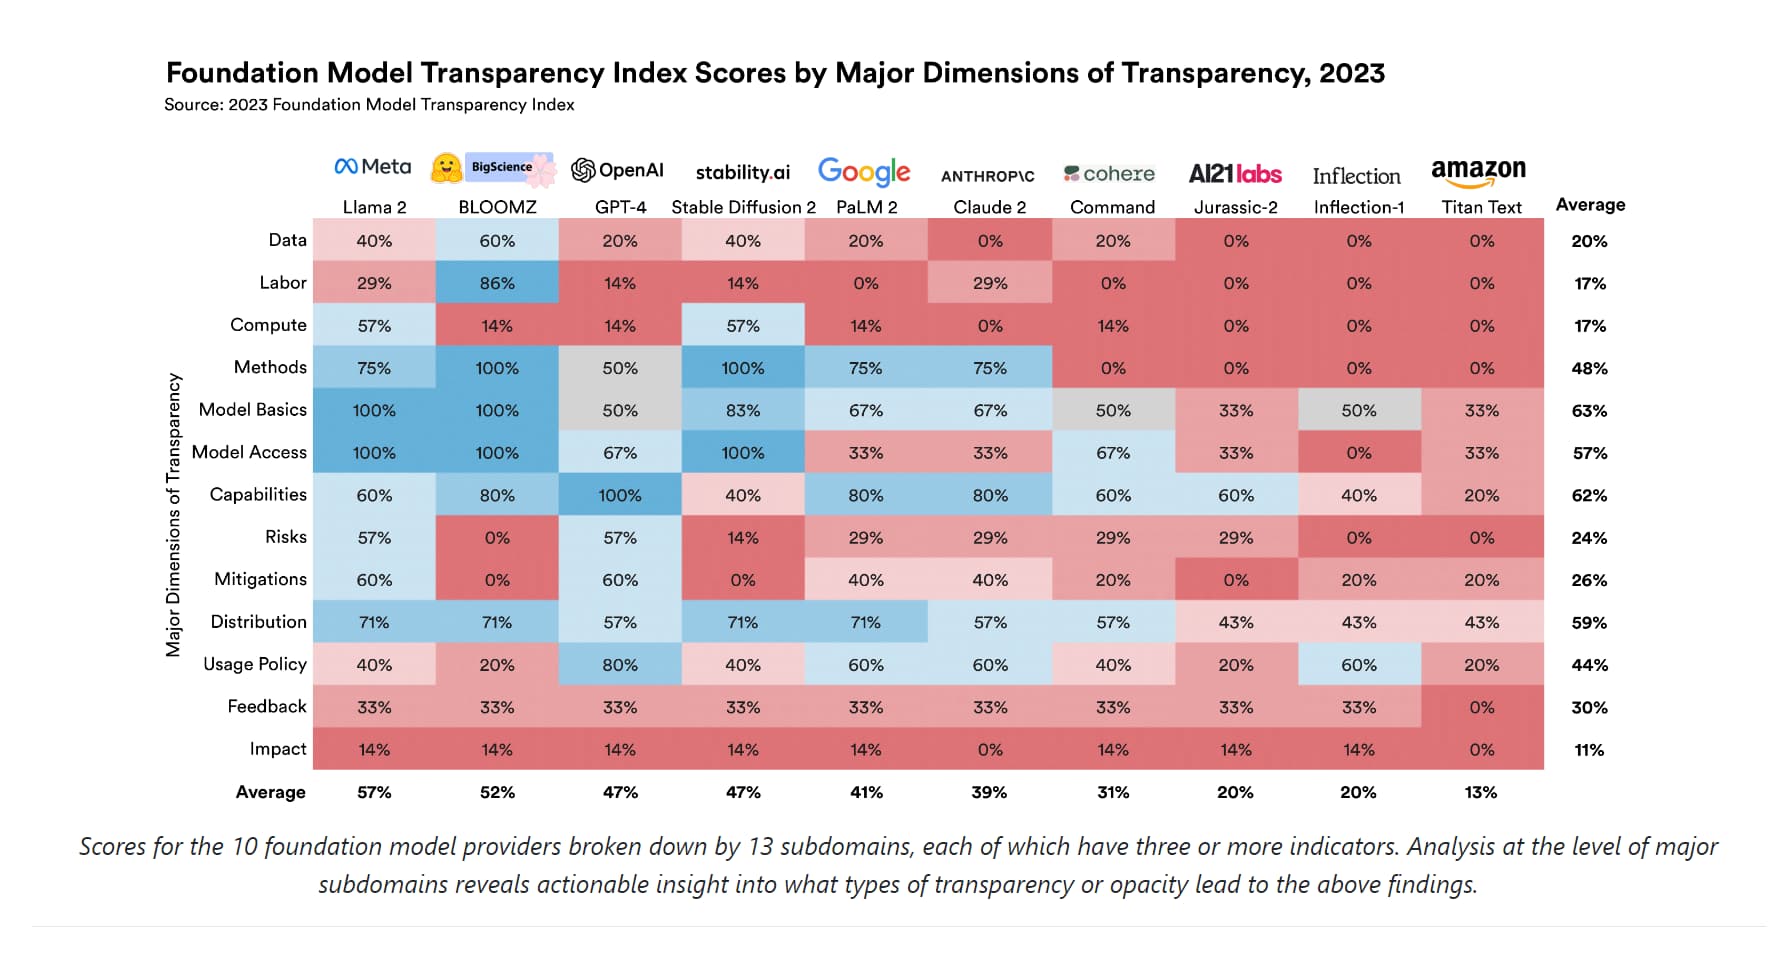 Stanford Study On Transparency Of AI Models Of Google, Meta, OpenAI, And Other Big Companies